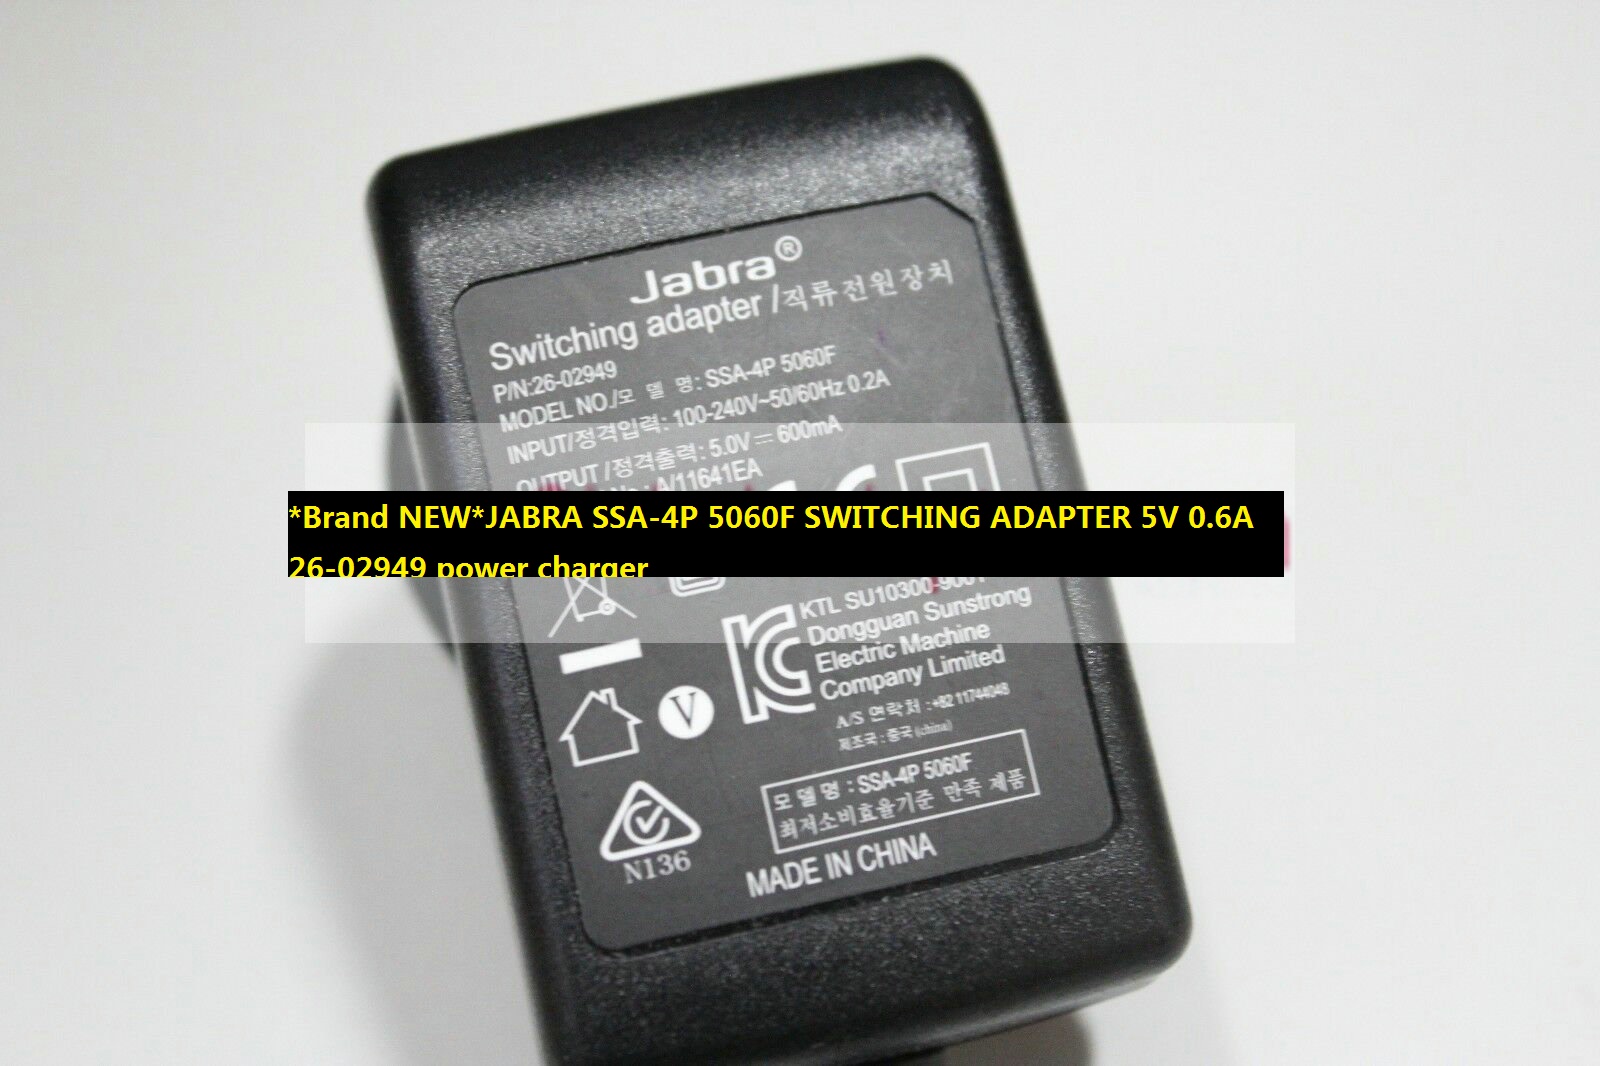 *Brand NEW*JABRA SSA-4P 5060F SWITCHING ADAPTER 5V 0.6A 26-02949 power charger